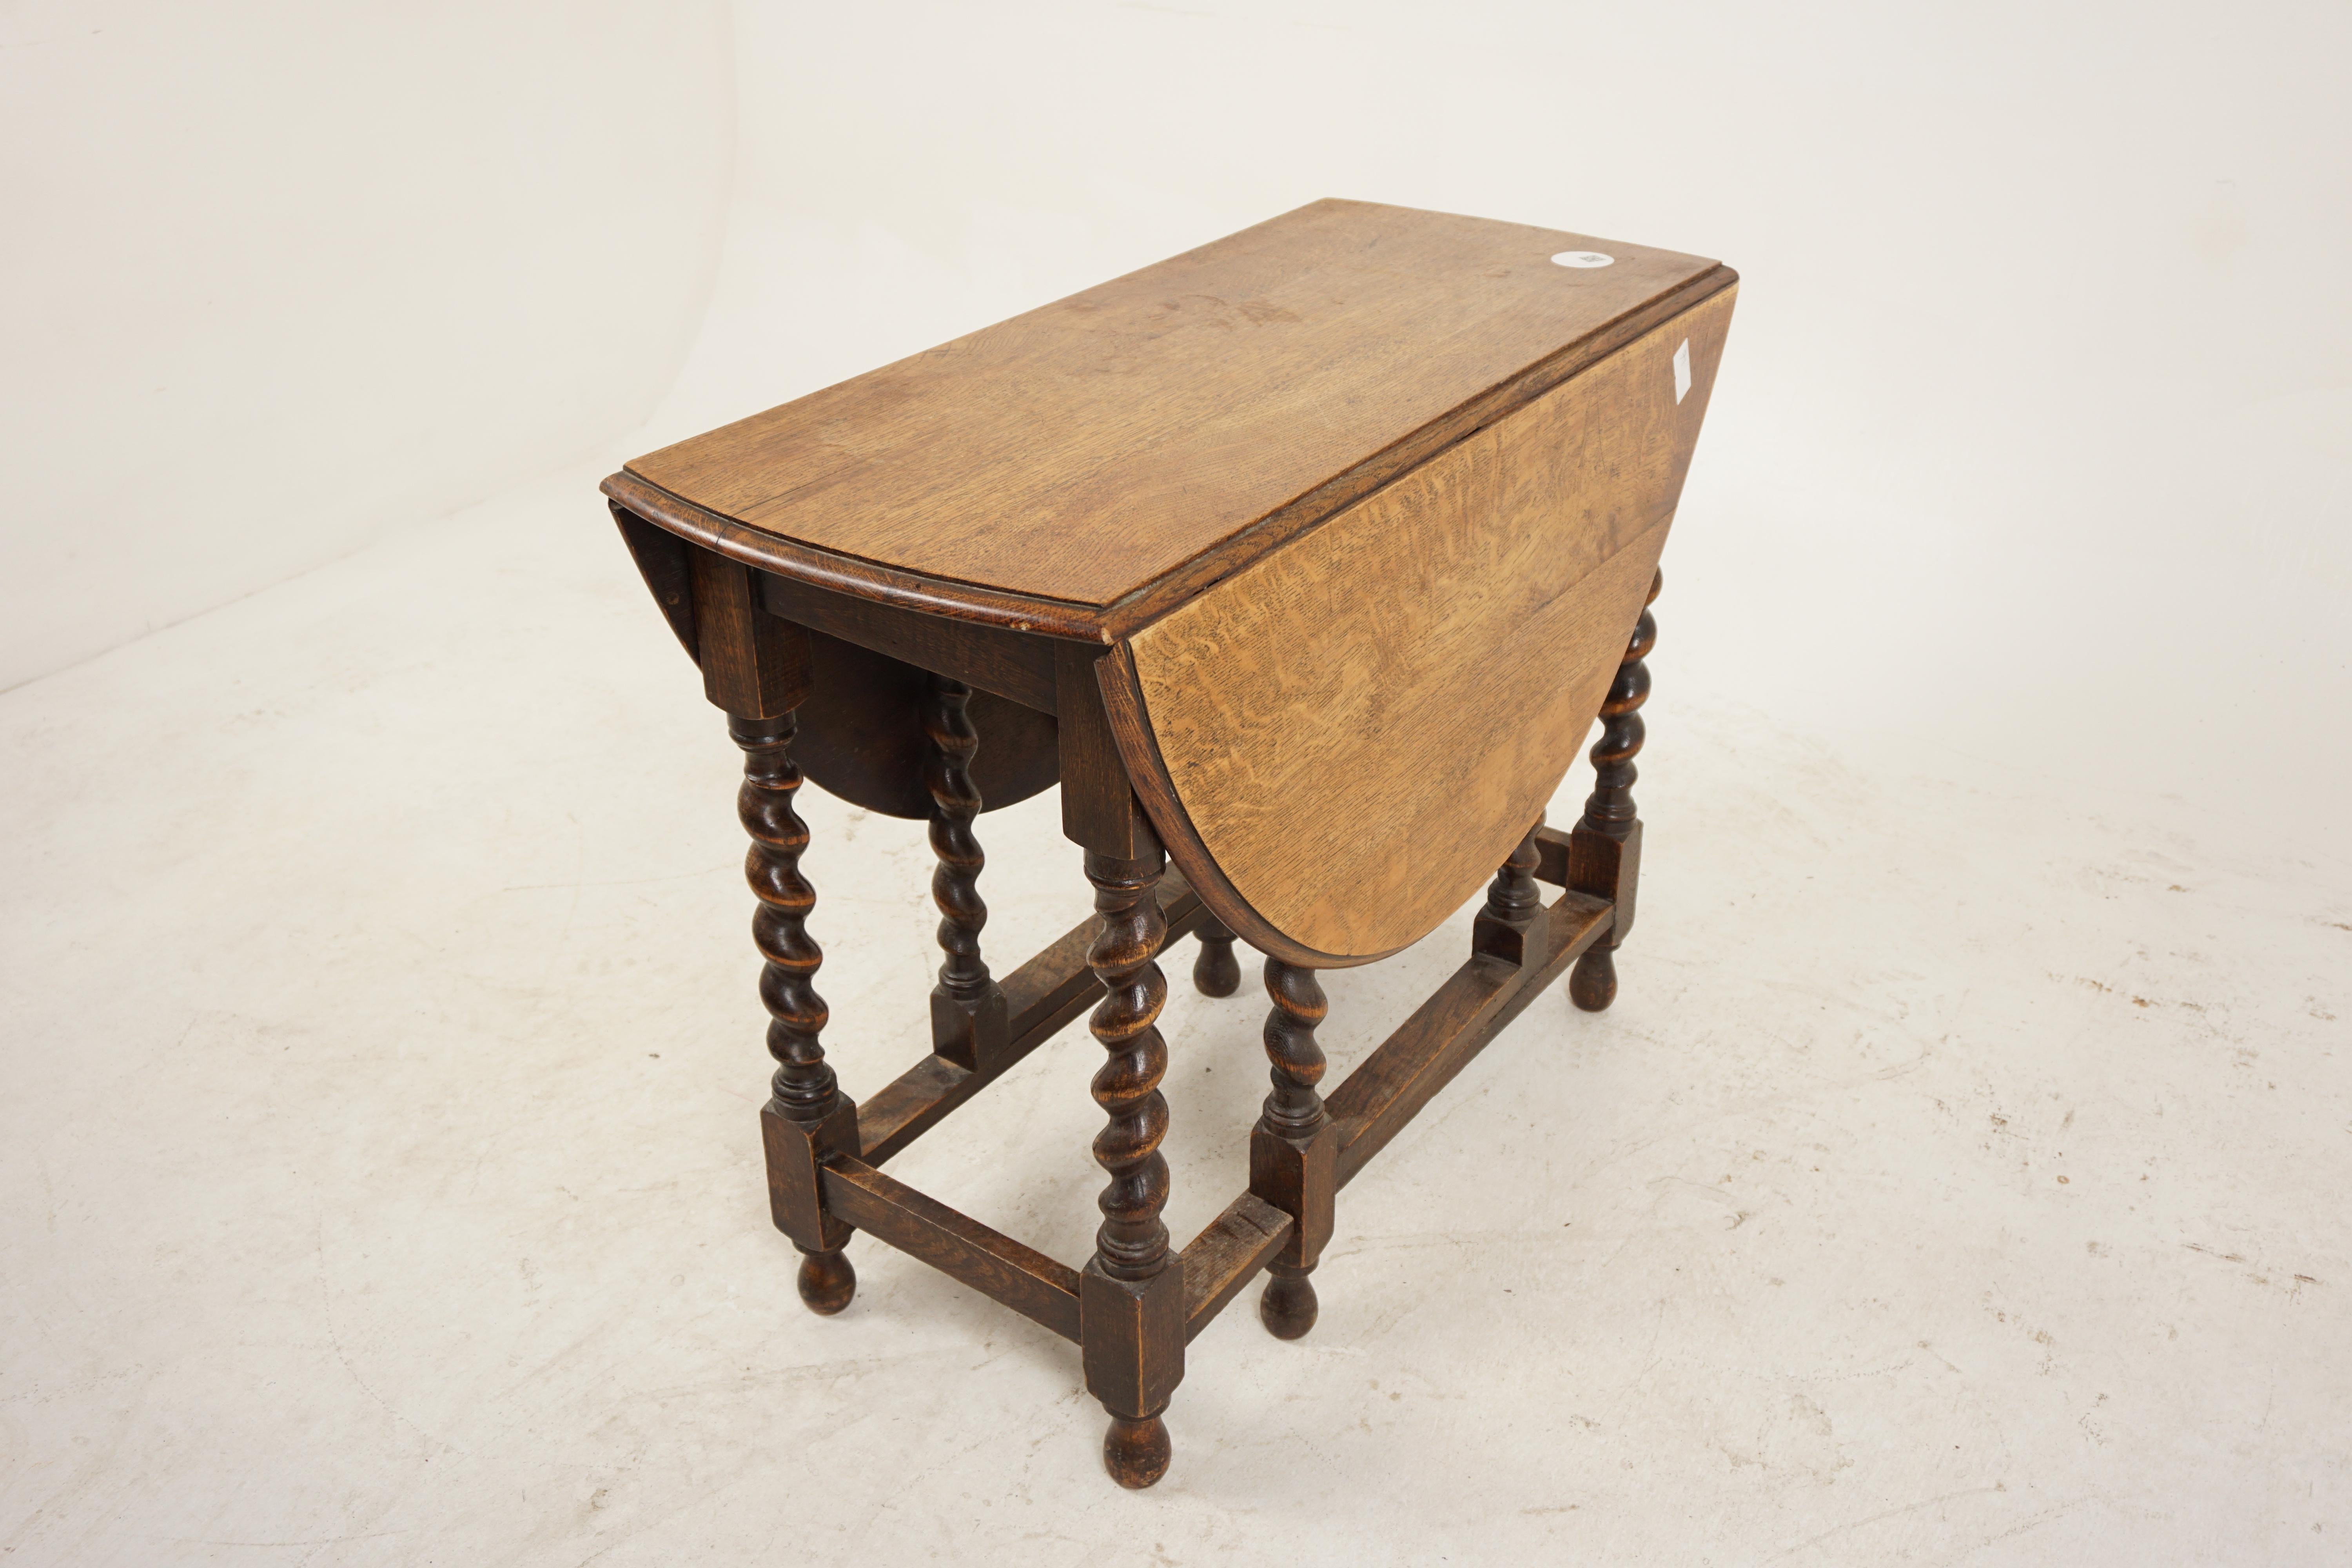 Antique Oak Table, Oak Barley Twist Gateleg, Drop Leaf Table, Antique Furniture, Scotland 1910, H1024

Scotland 1910
Solid Oak
Original Finish
Rectangular moulded top with rounded ends
Pair of drop leaves on the side
All standing on eight